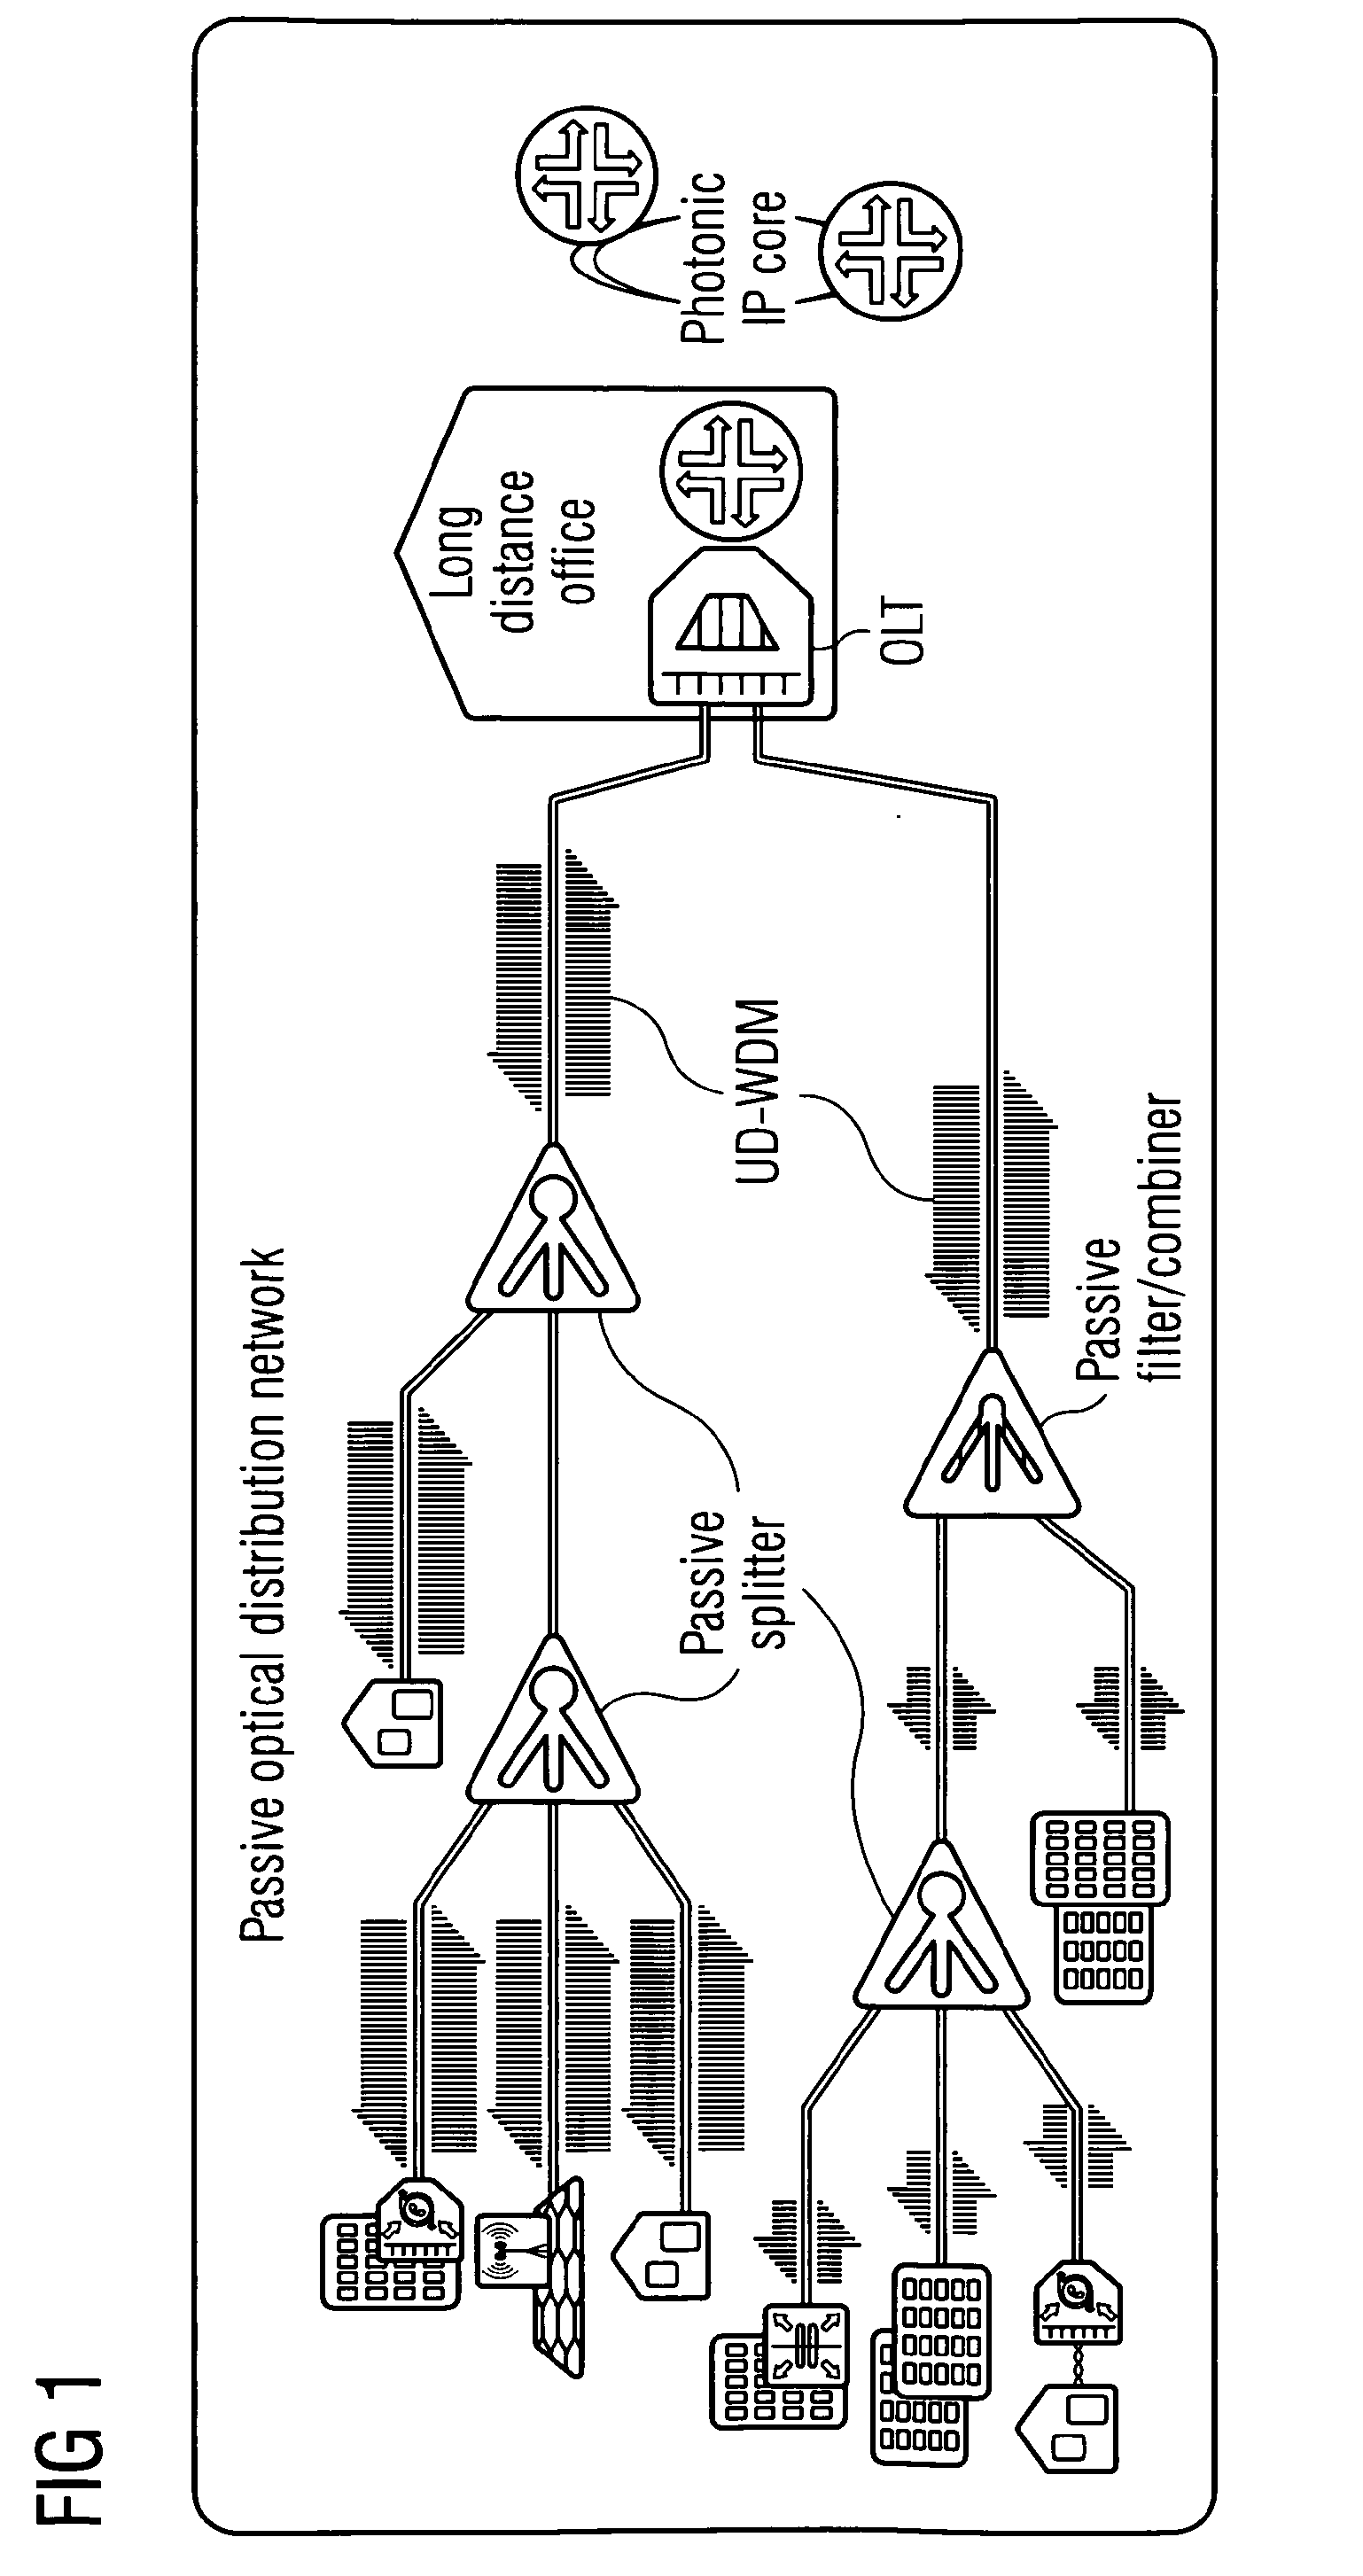 Optical line terminal transmitting device for next generation optical access networks